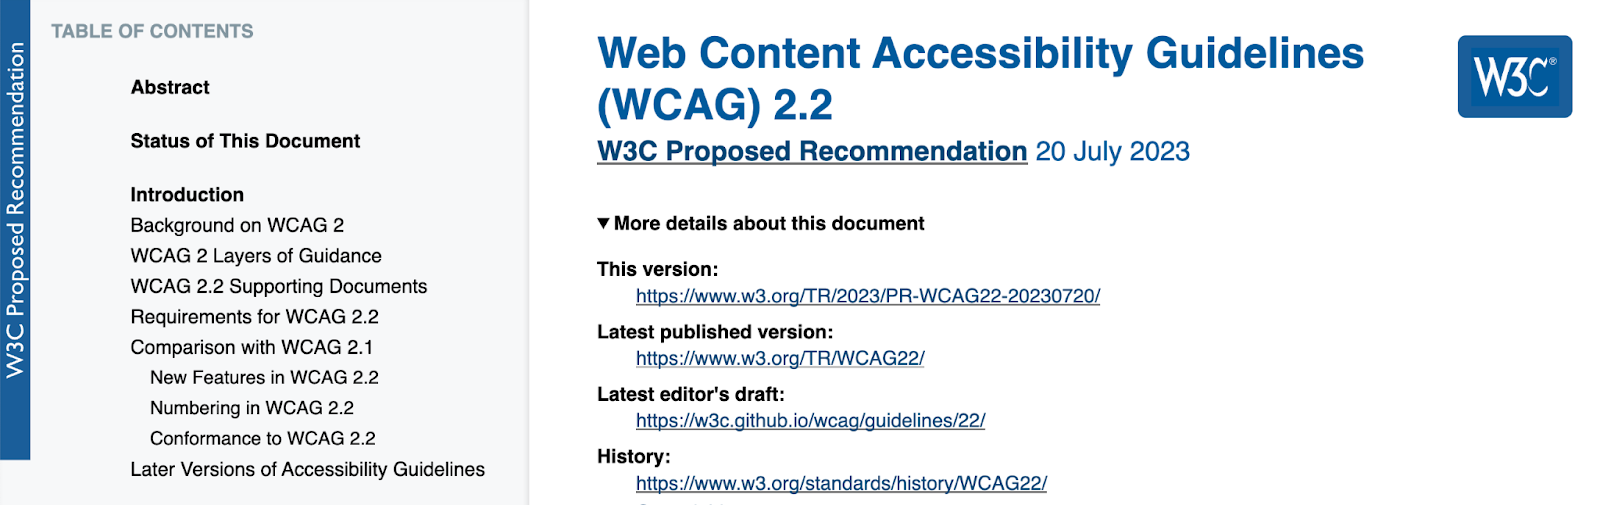 designing for accessibility, WCAG